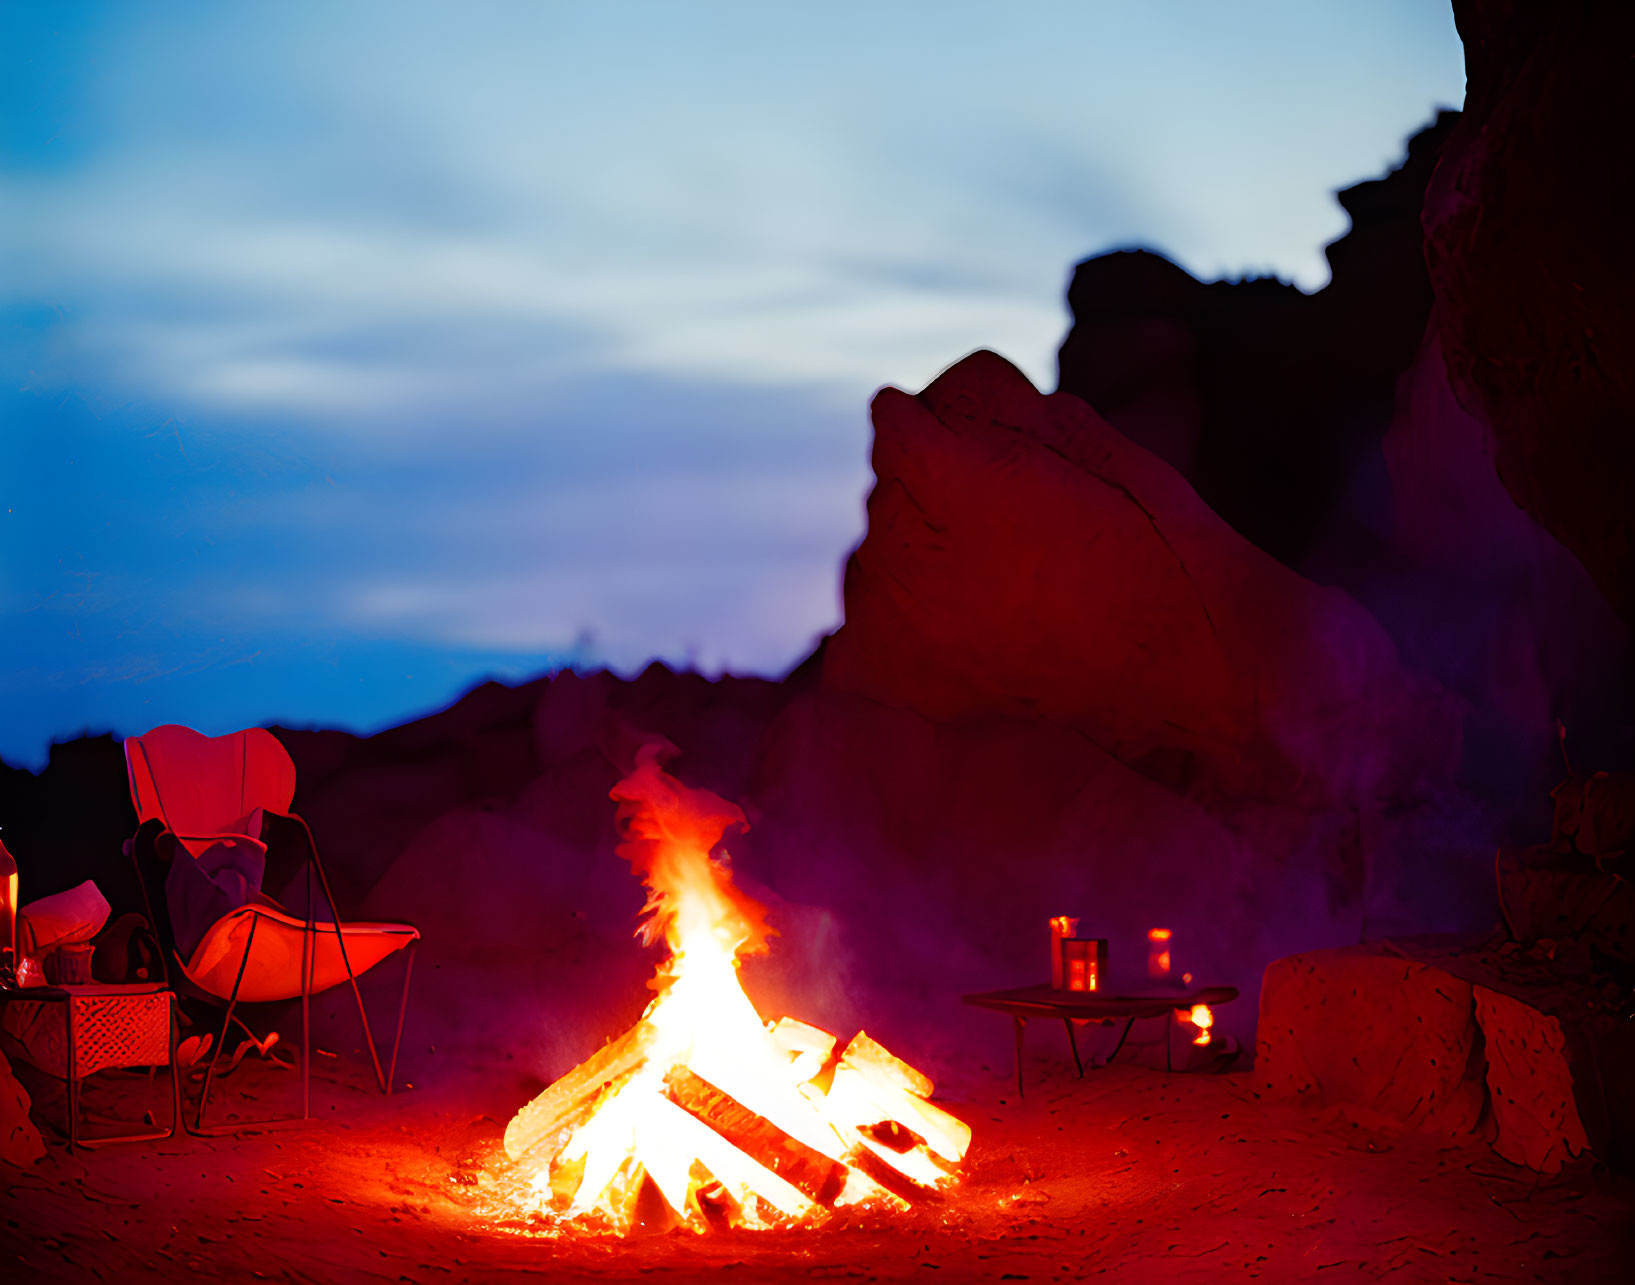 Vibrant dusk campfire with chair and supplies against rocky backdrop